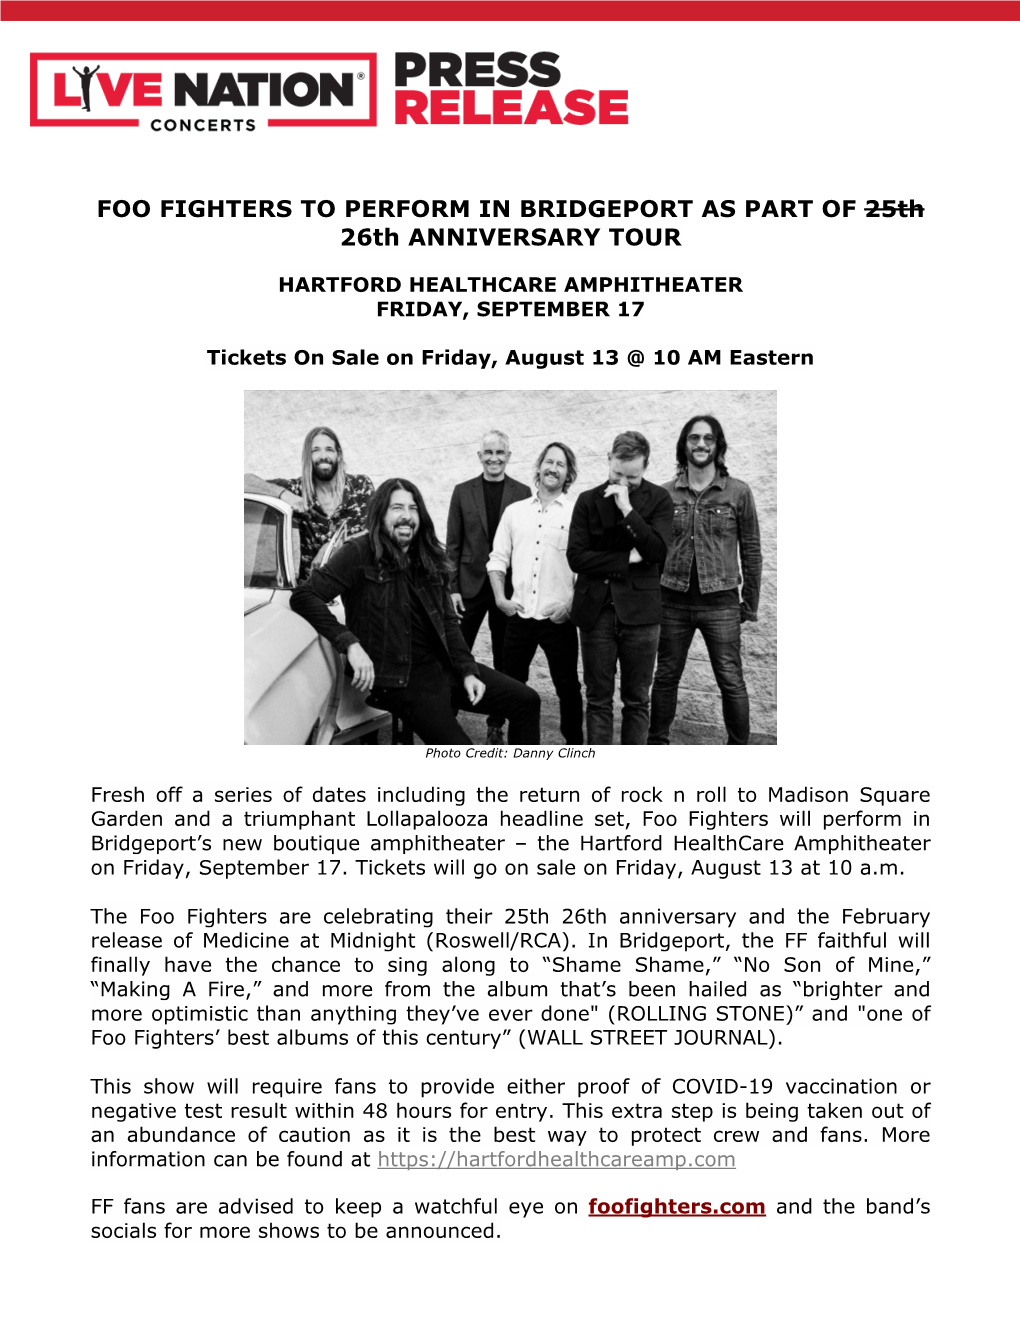 FOO FIGHTERS to PERFORM in BRIDGEPORT AS PART of 25Th 26Th ANNIVERSARY TOUR